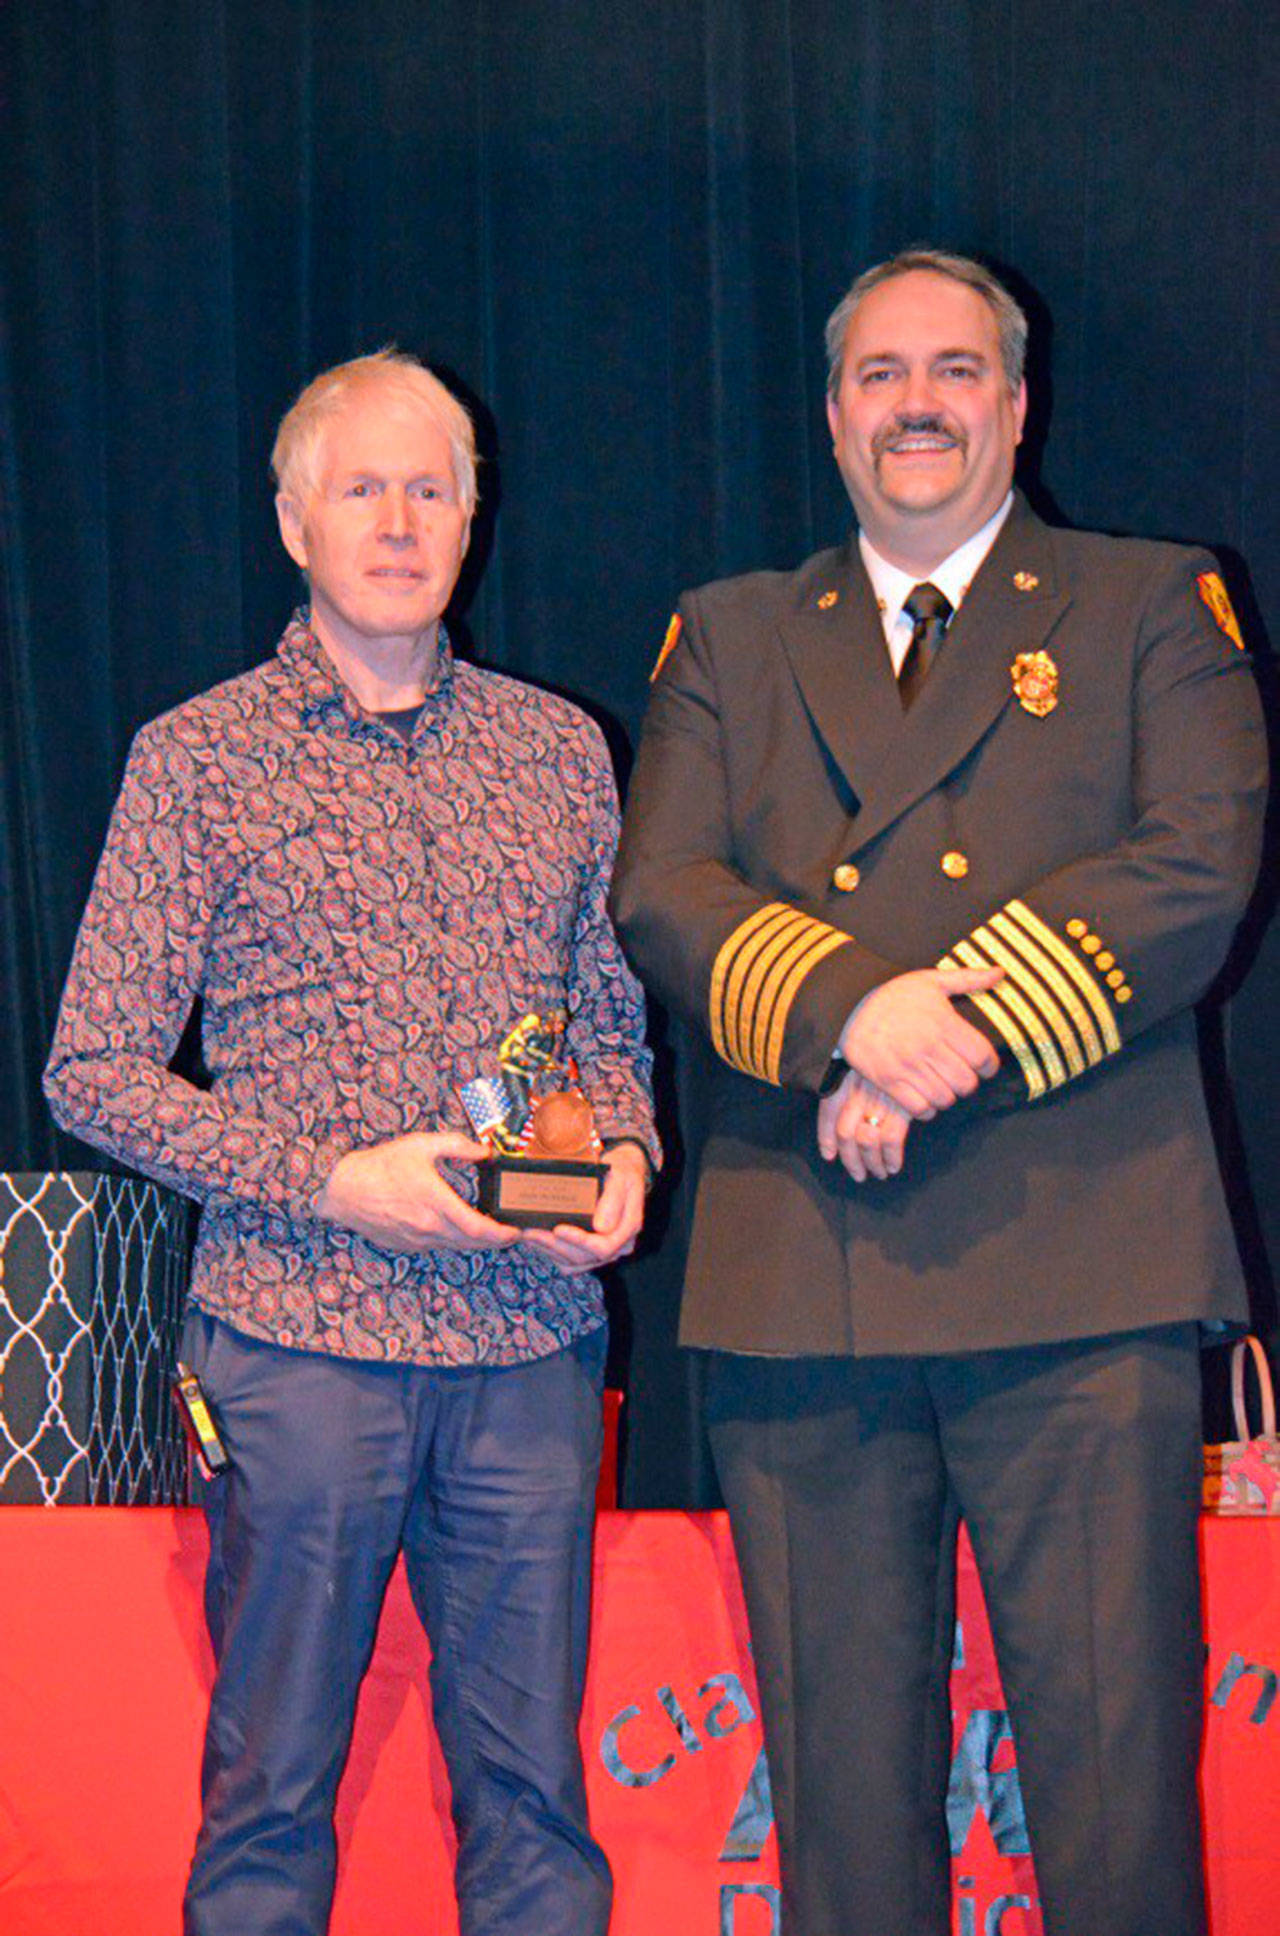 John McKenzie received the Volunteer Firefighter of the Year award in January from Fire Chief Ben Andrews. He was selected by a committee of peers after nominations for his accomplishments. Photo courtesy of Clallam County Fire District 3